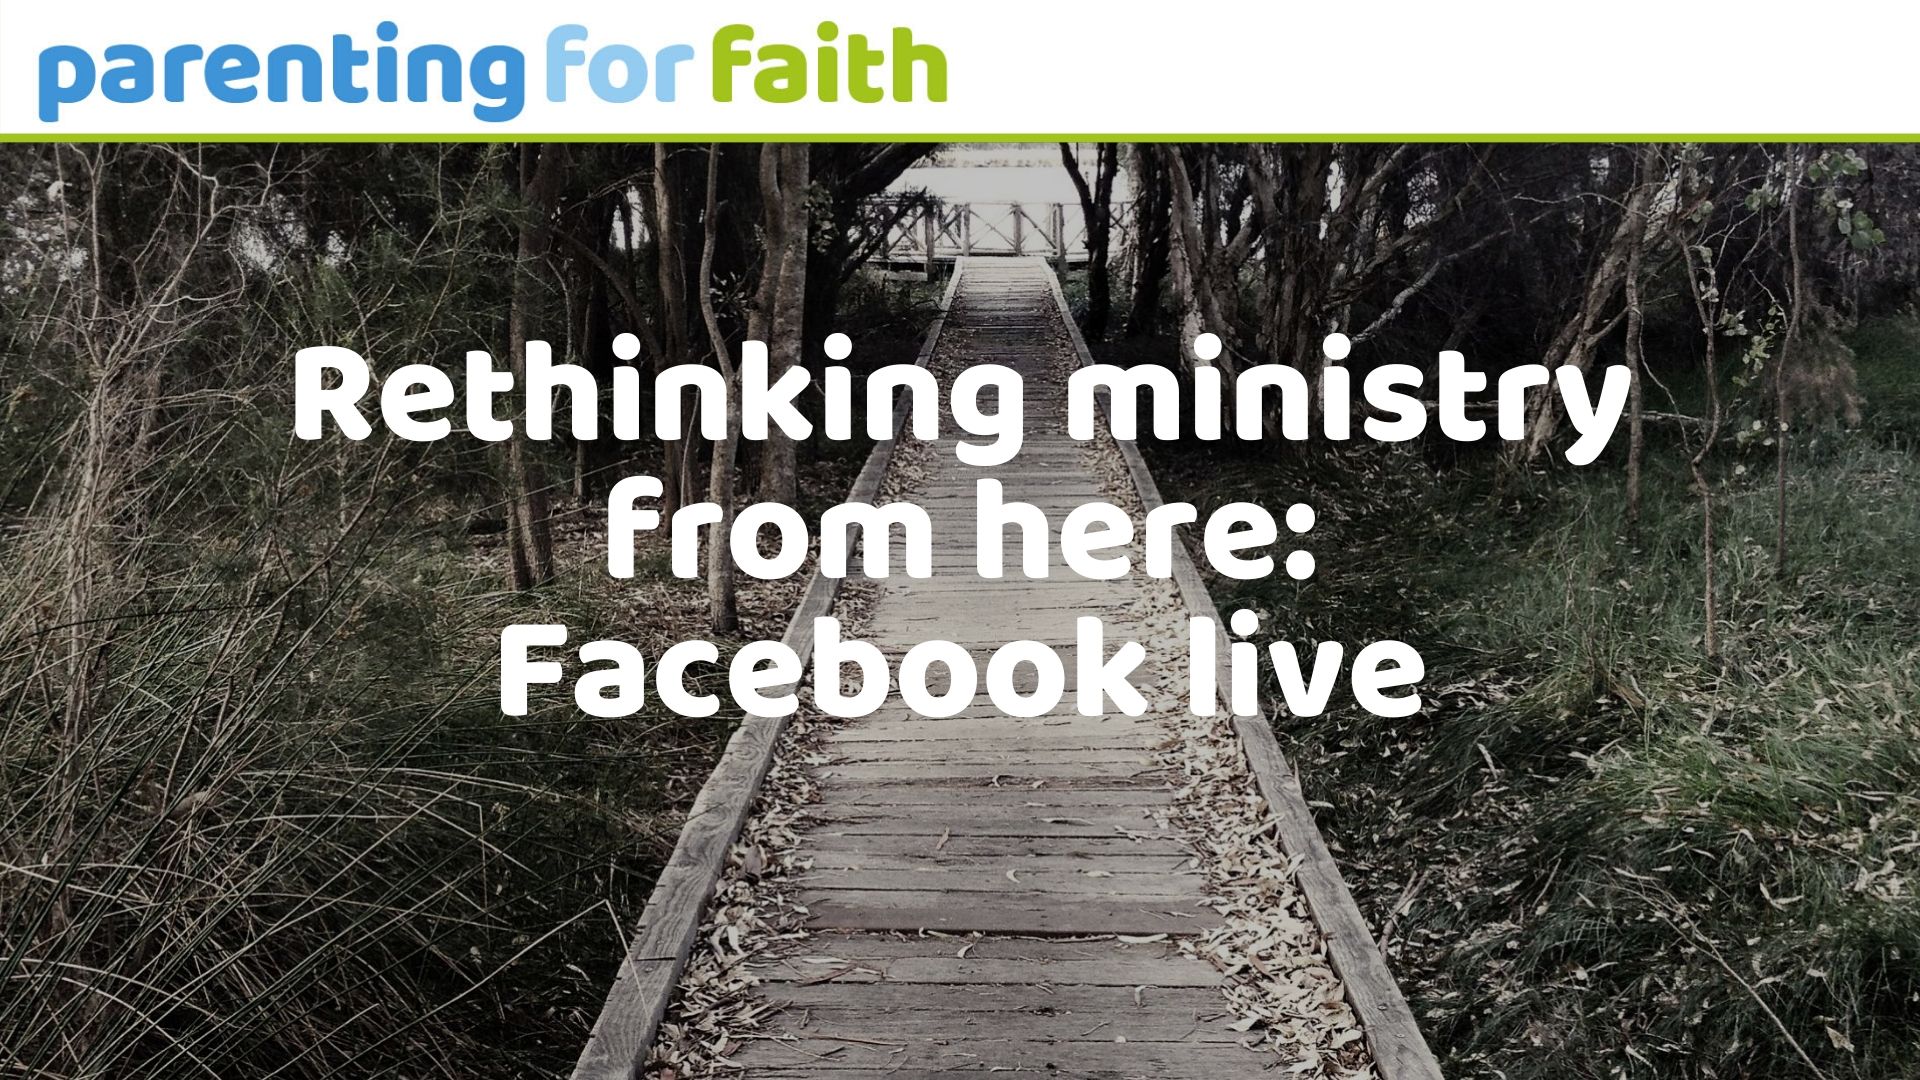 rethinking ministry from here OG image 1920 x 1080px 5